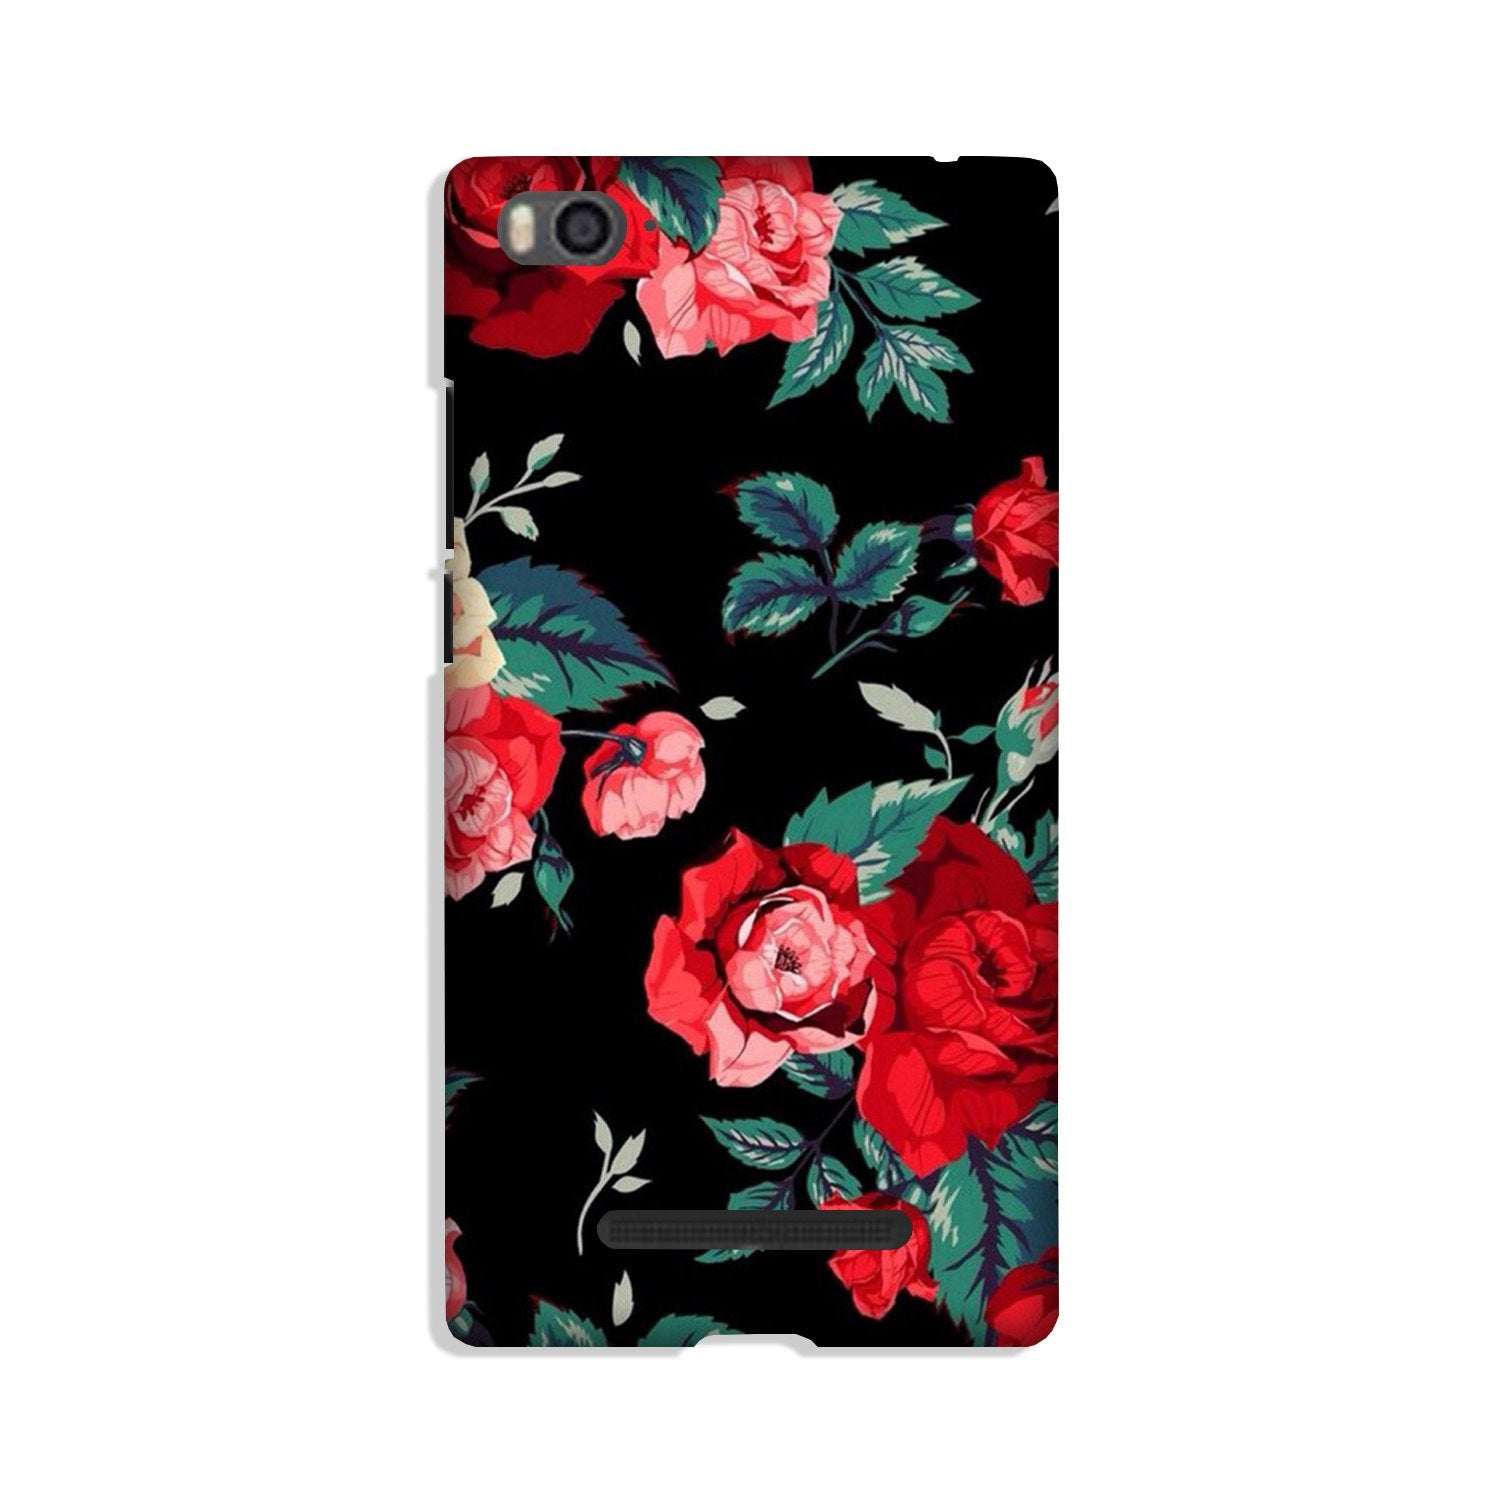 Red Rose2 Case for Redmi 4A